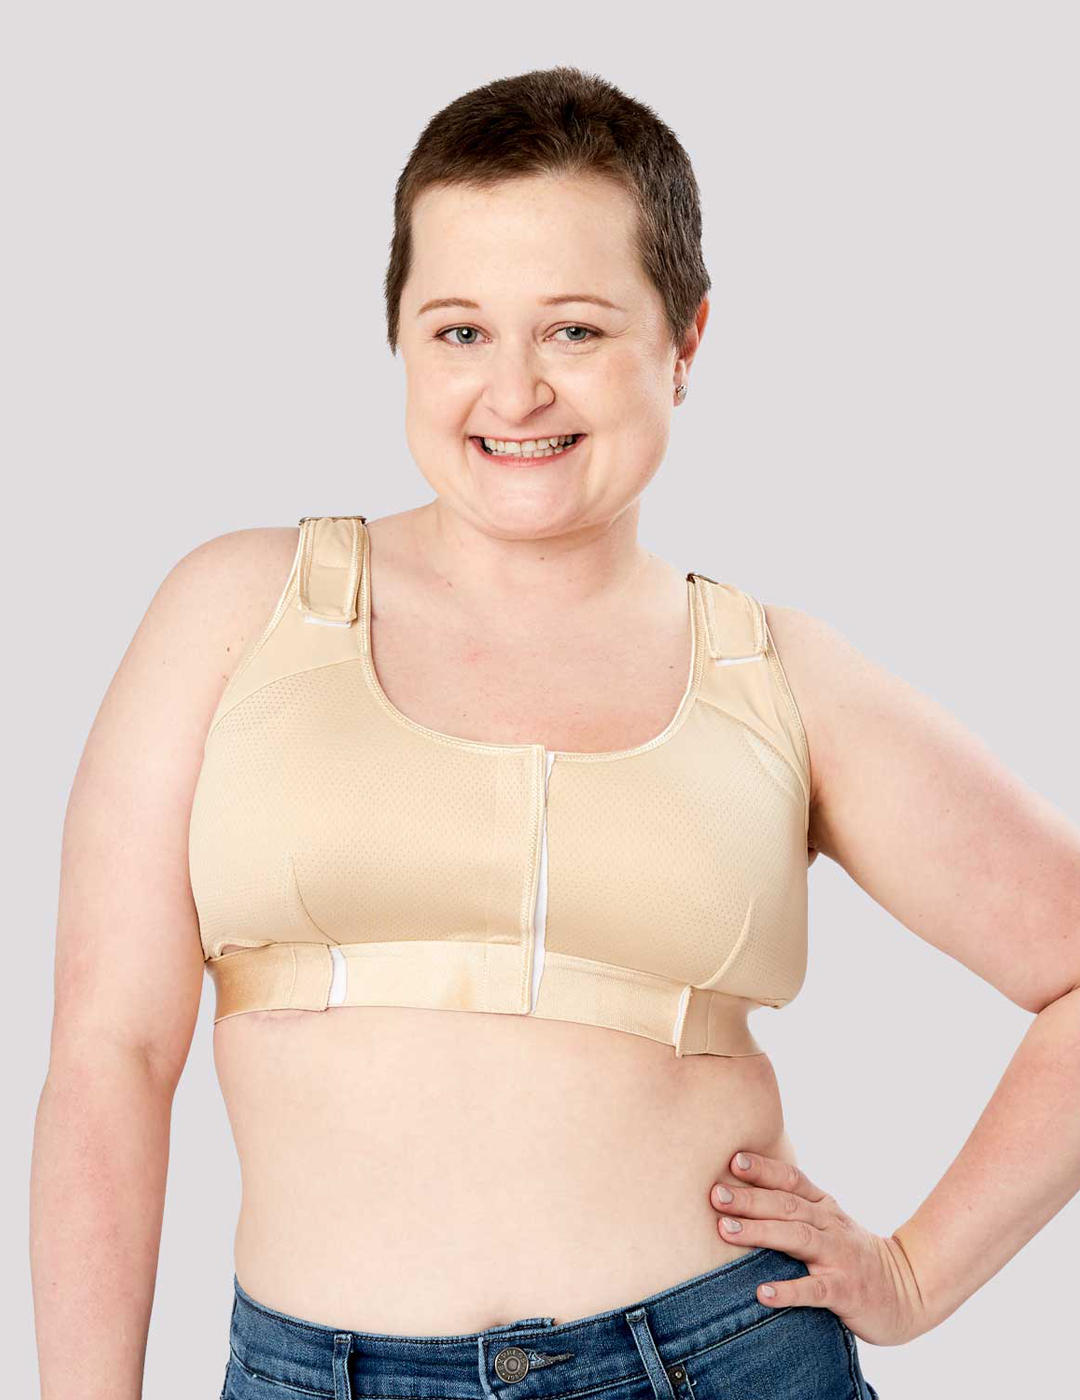 La Vie en Rose - We are proud to carry our post-mastectomy bra